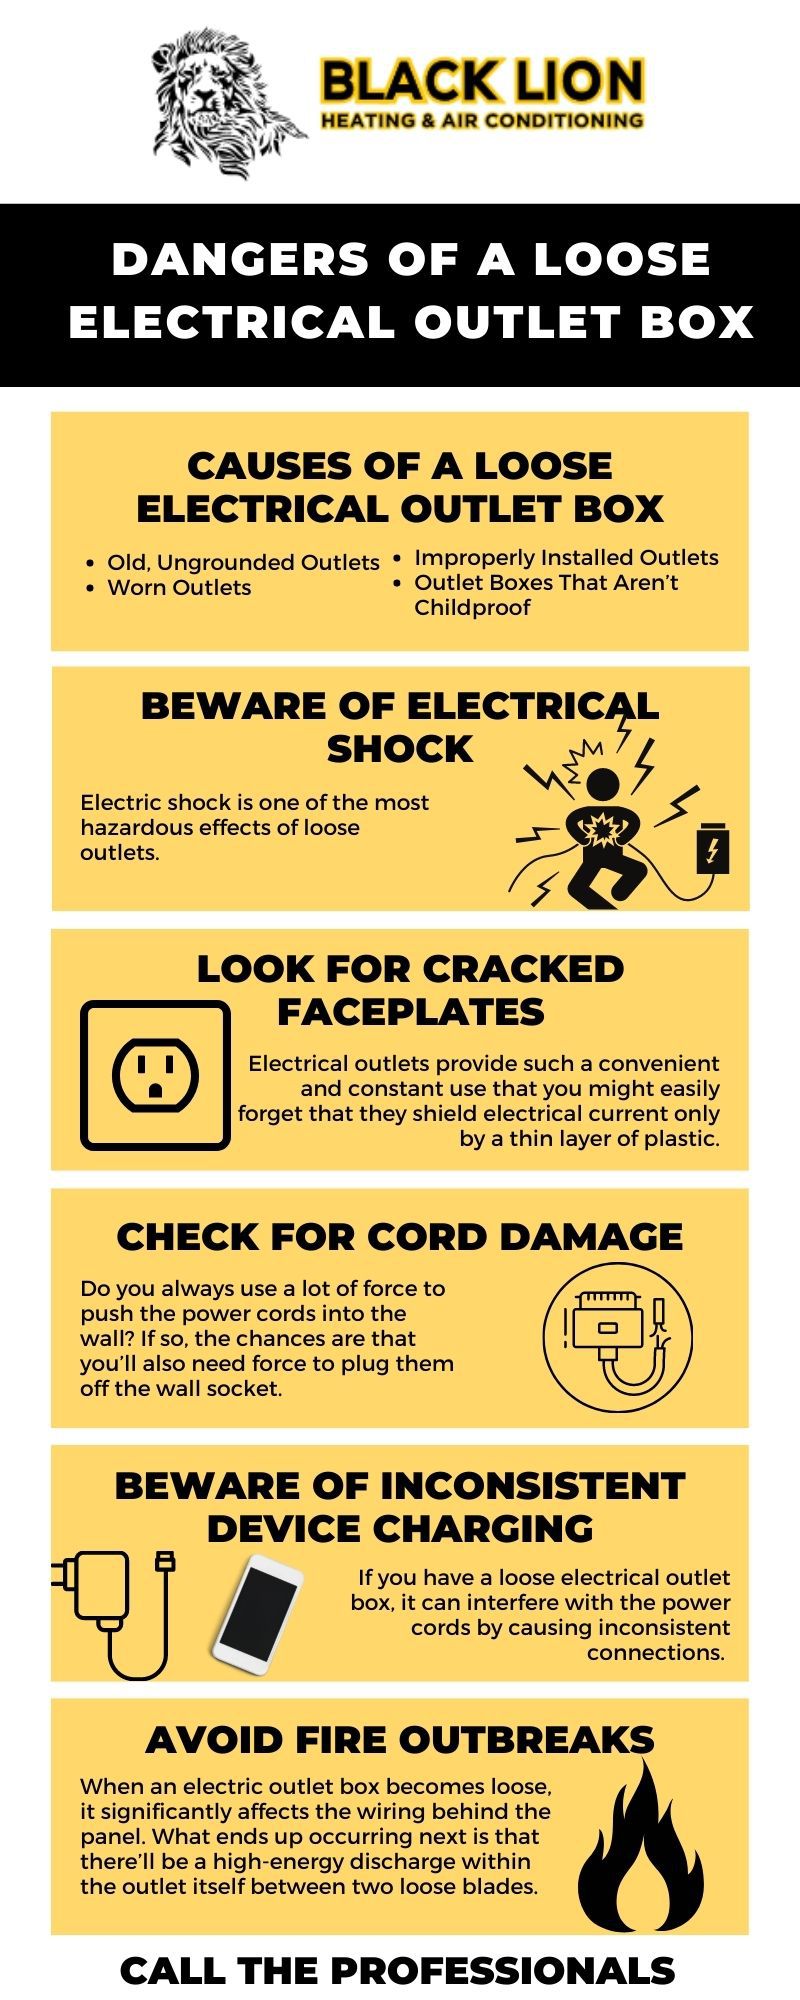 Dangers of a loose electrical outlet box